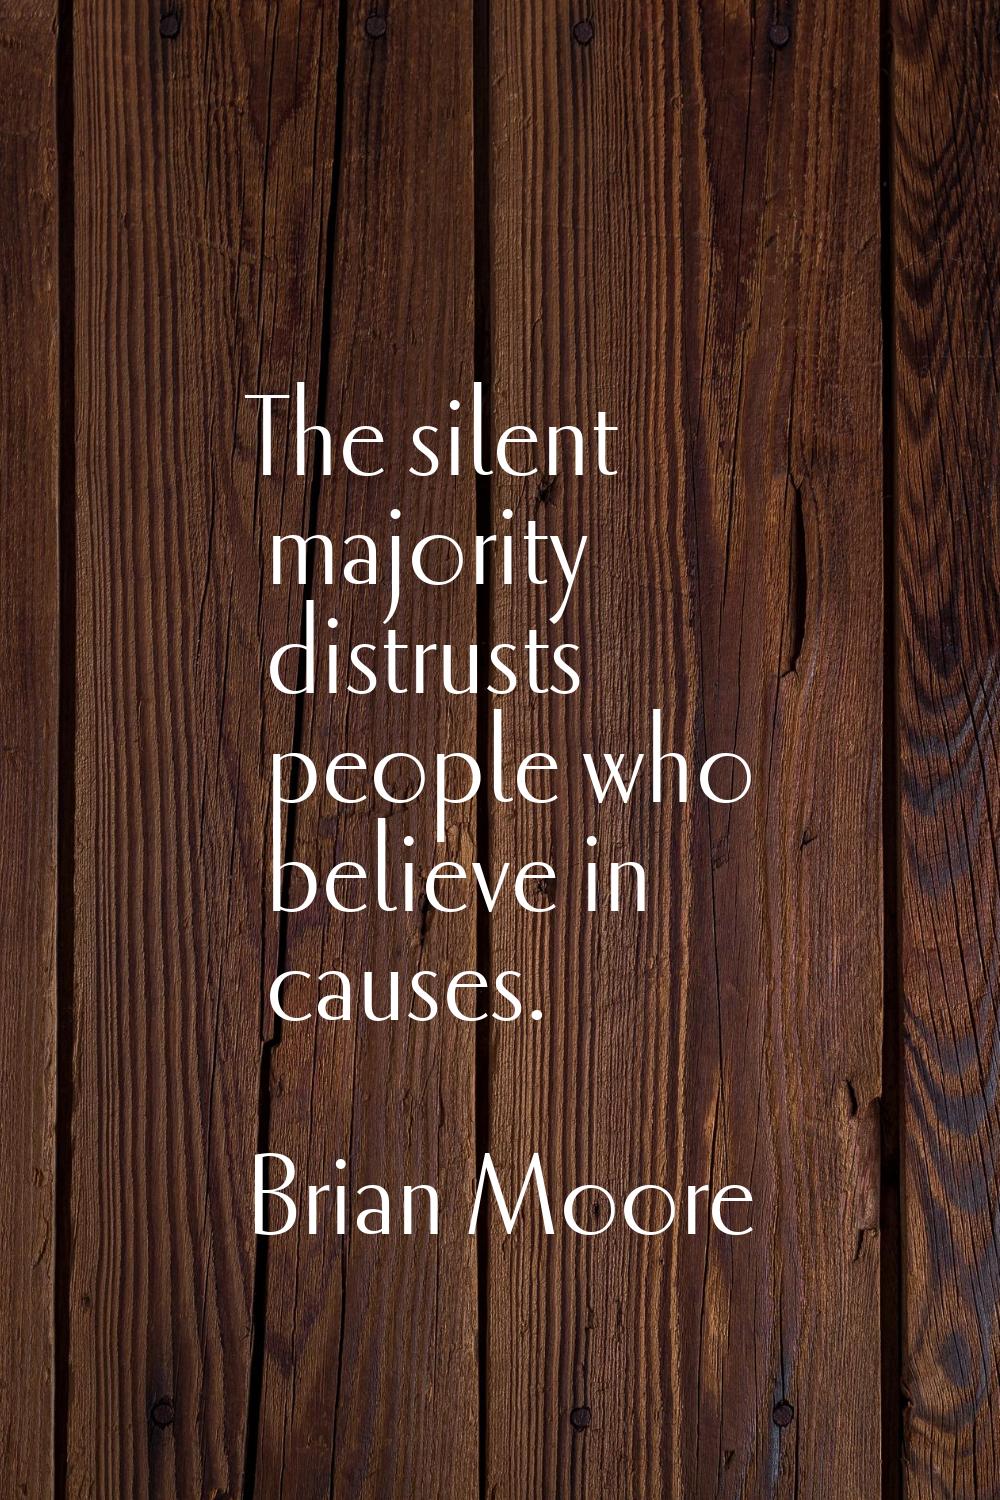 The silent majority distrusts people who believe in causes.